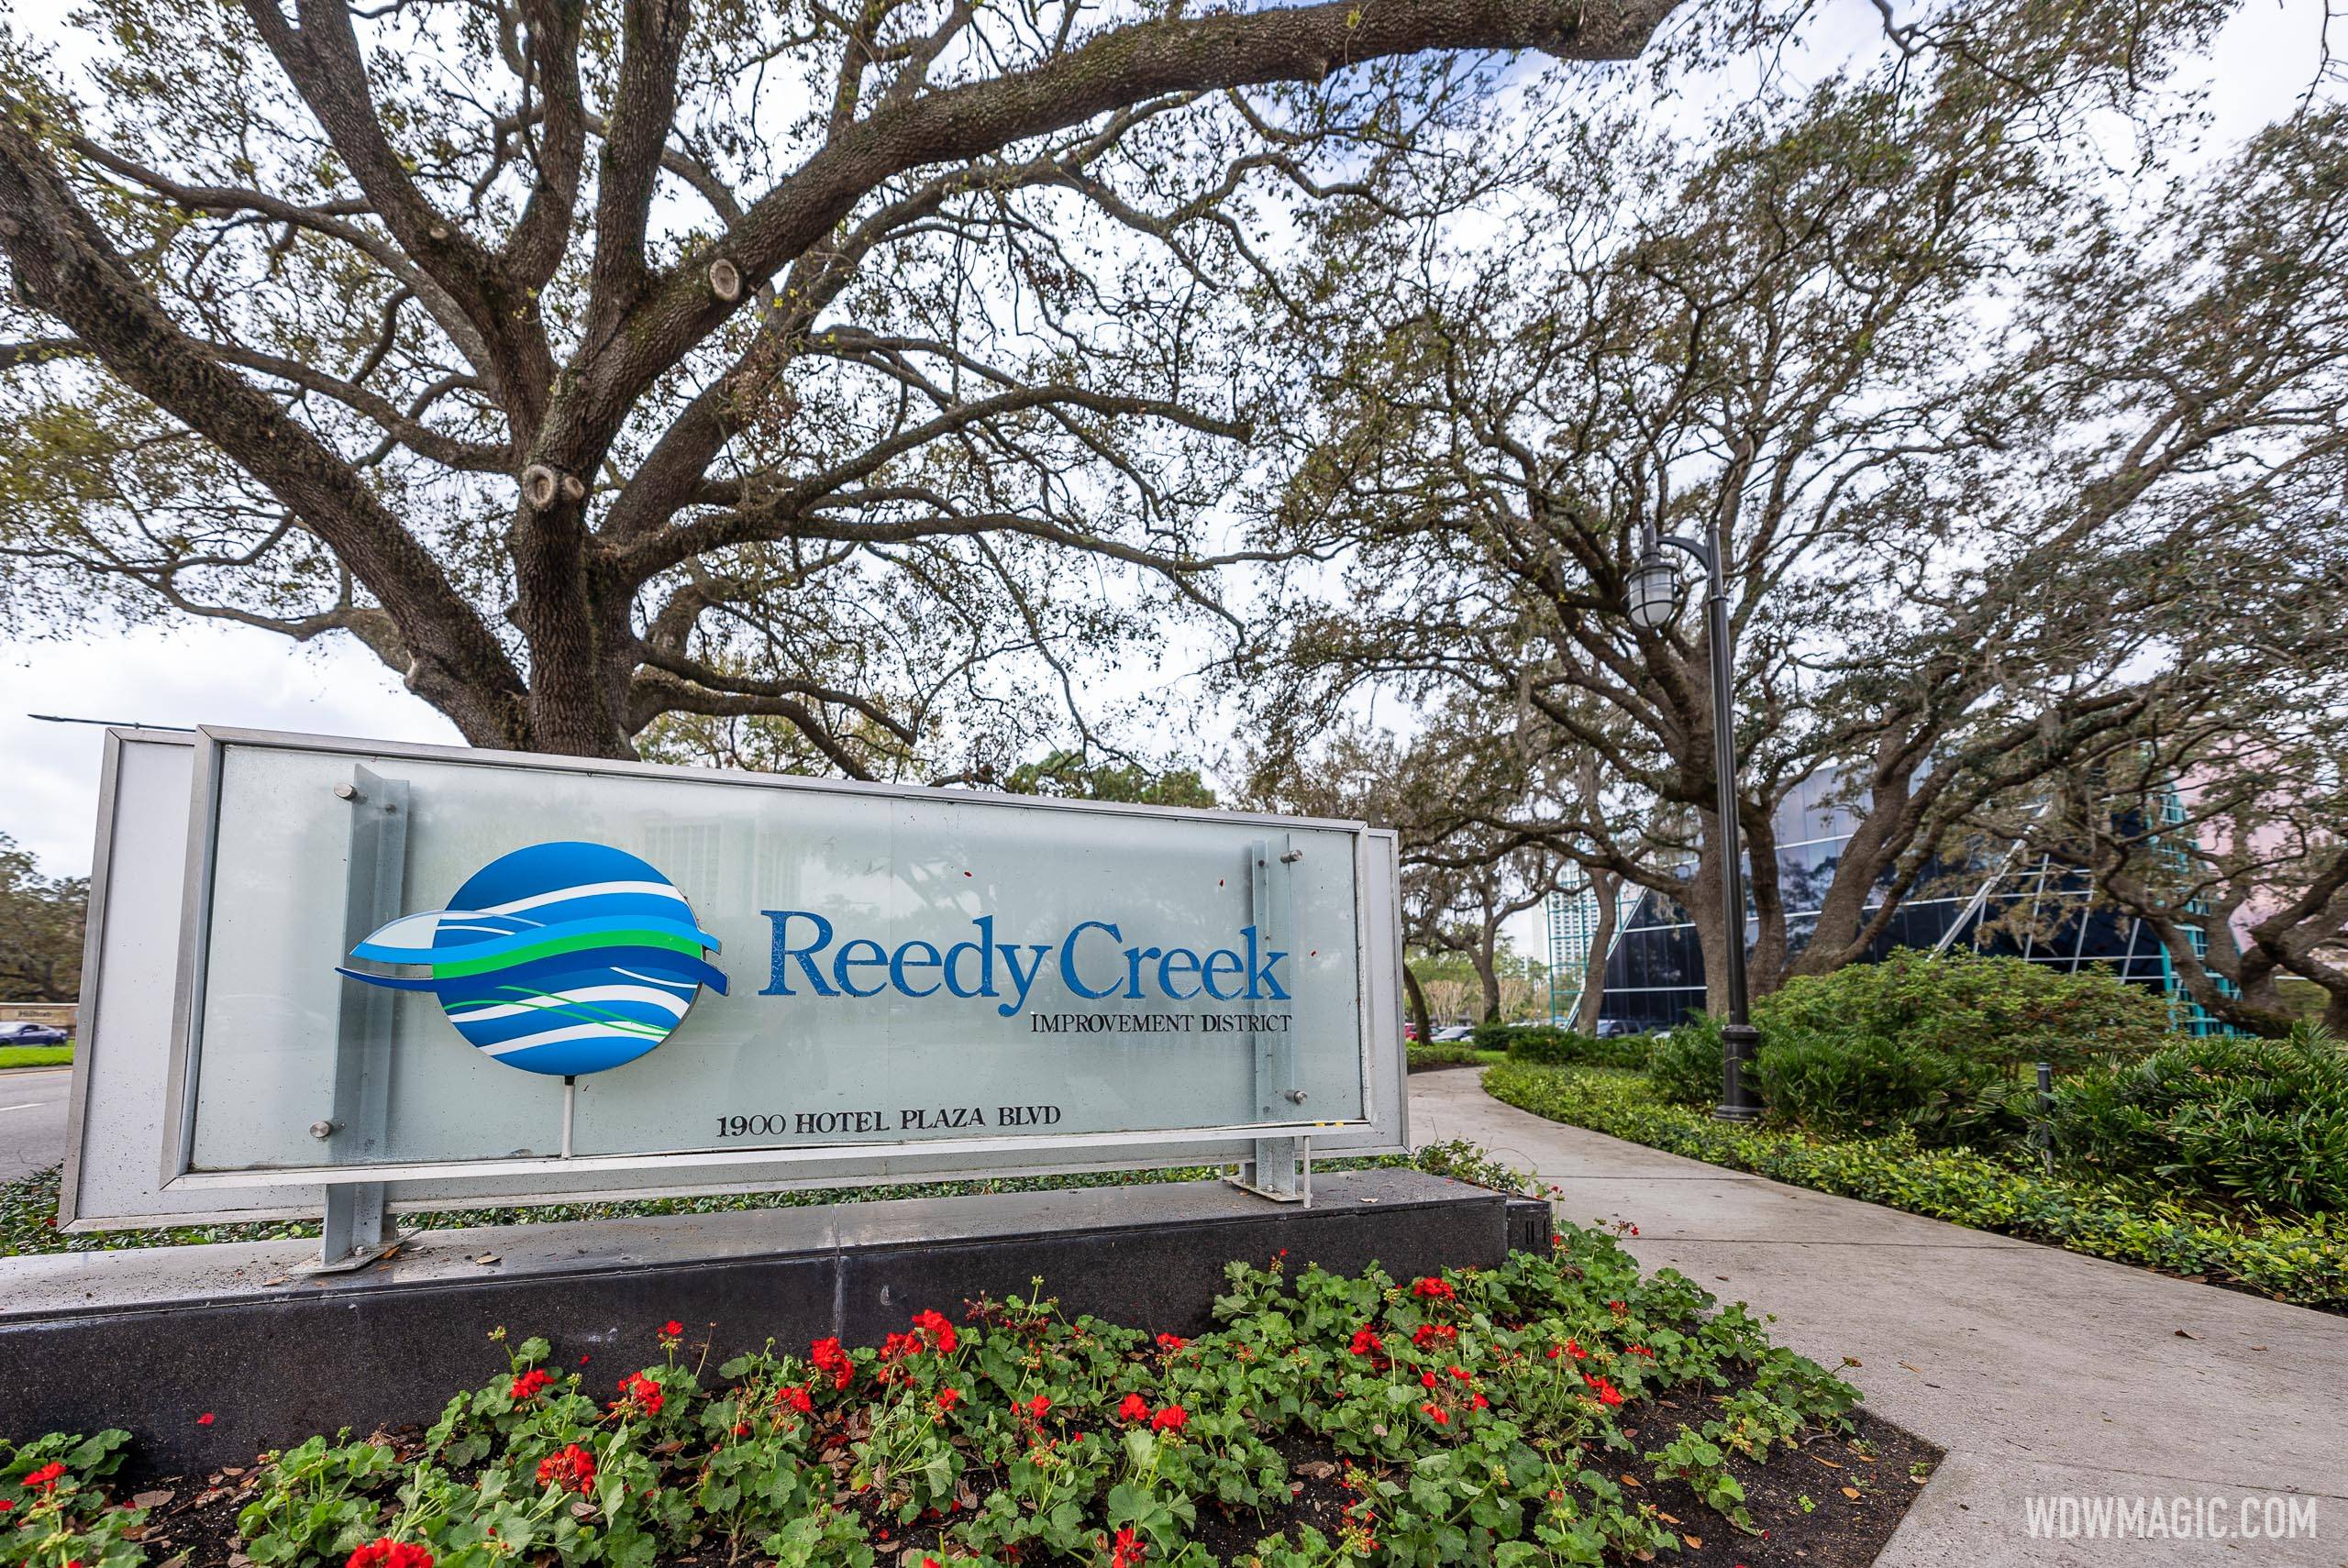 The Disney CEO did not comment on Reedy Creek and the impact of its changes